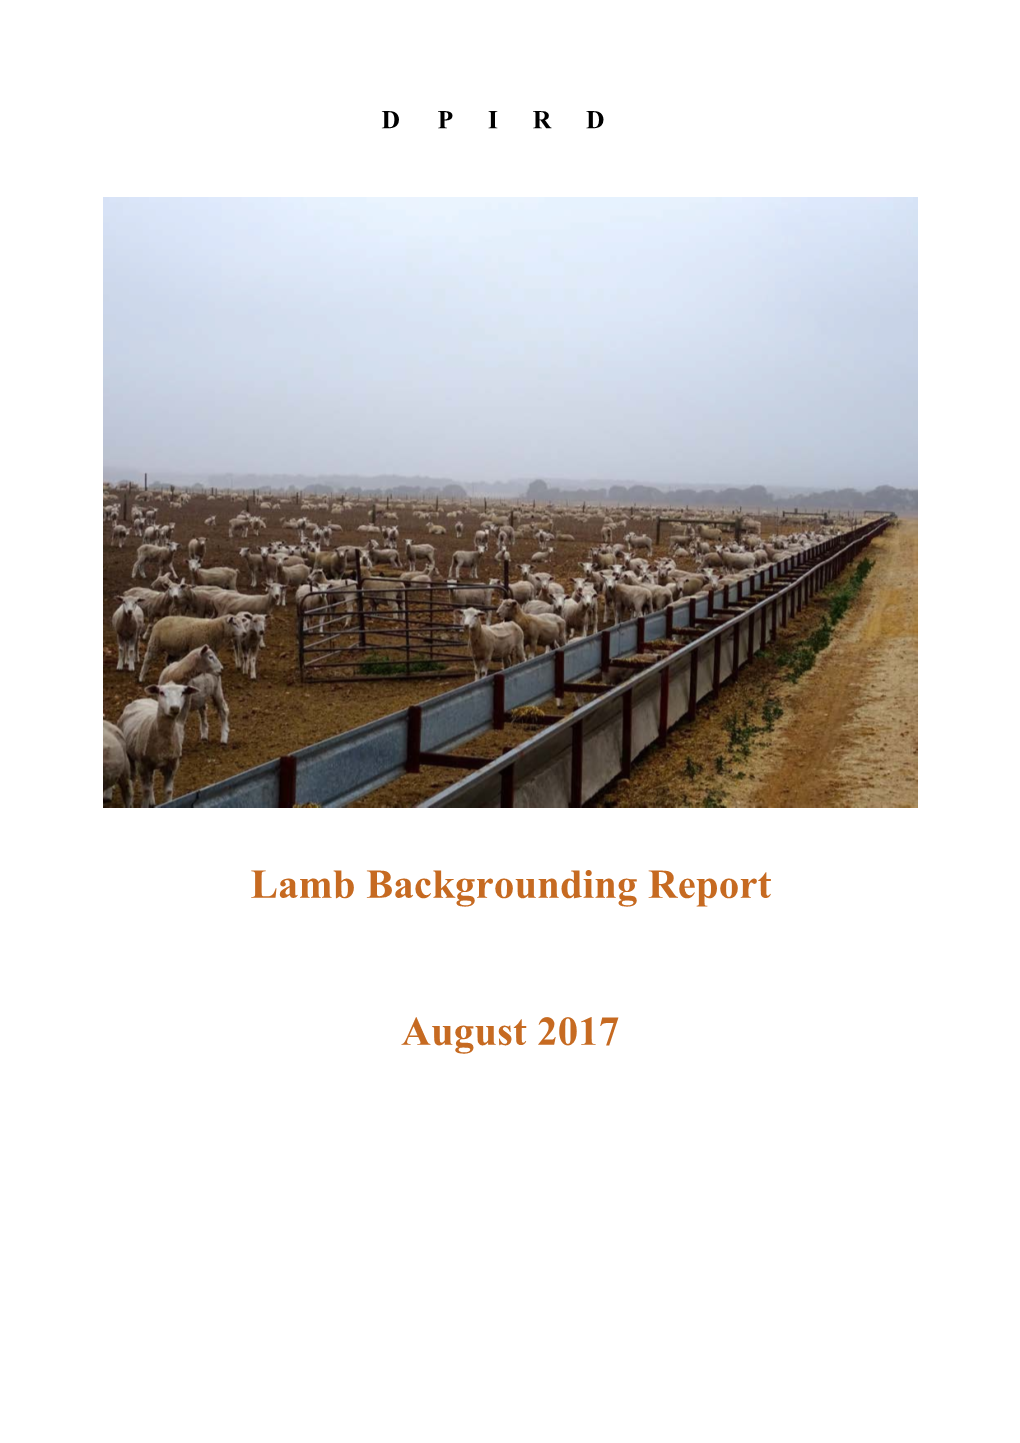 DAFWA Lamb Backgrounding Report 11-17.Pages